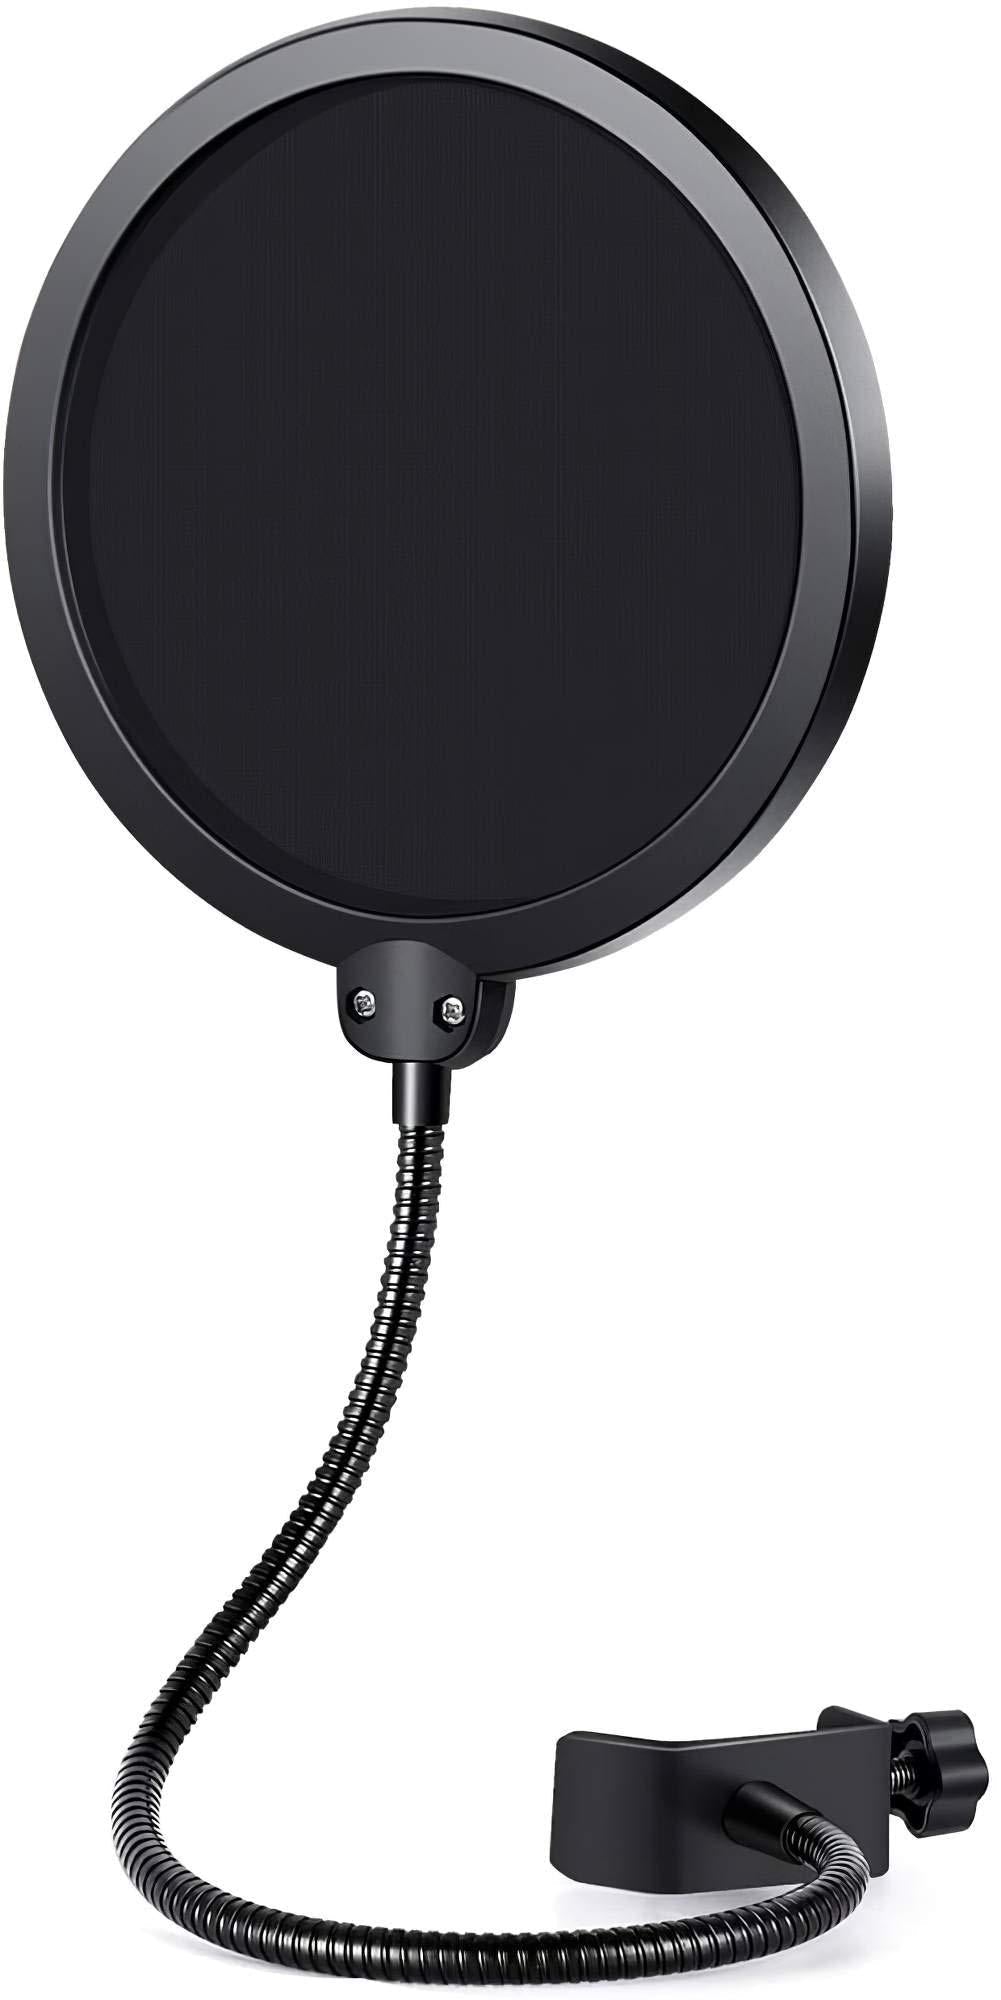 InnoGear Upgraded Microphone Pop Filter Mask Shield, Dual Layered Wind Pop Screen with Flexible 360° Gooseneck Clip Stabilizing Arm for Awesome Premium Recordings, Broadcasting, Streaming, Singing